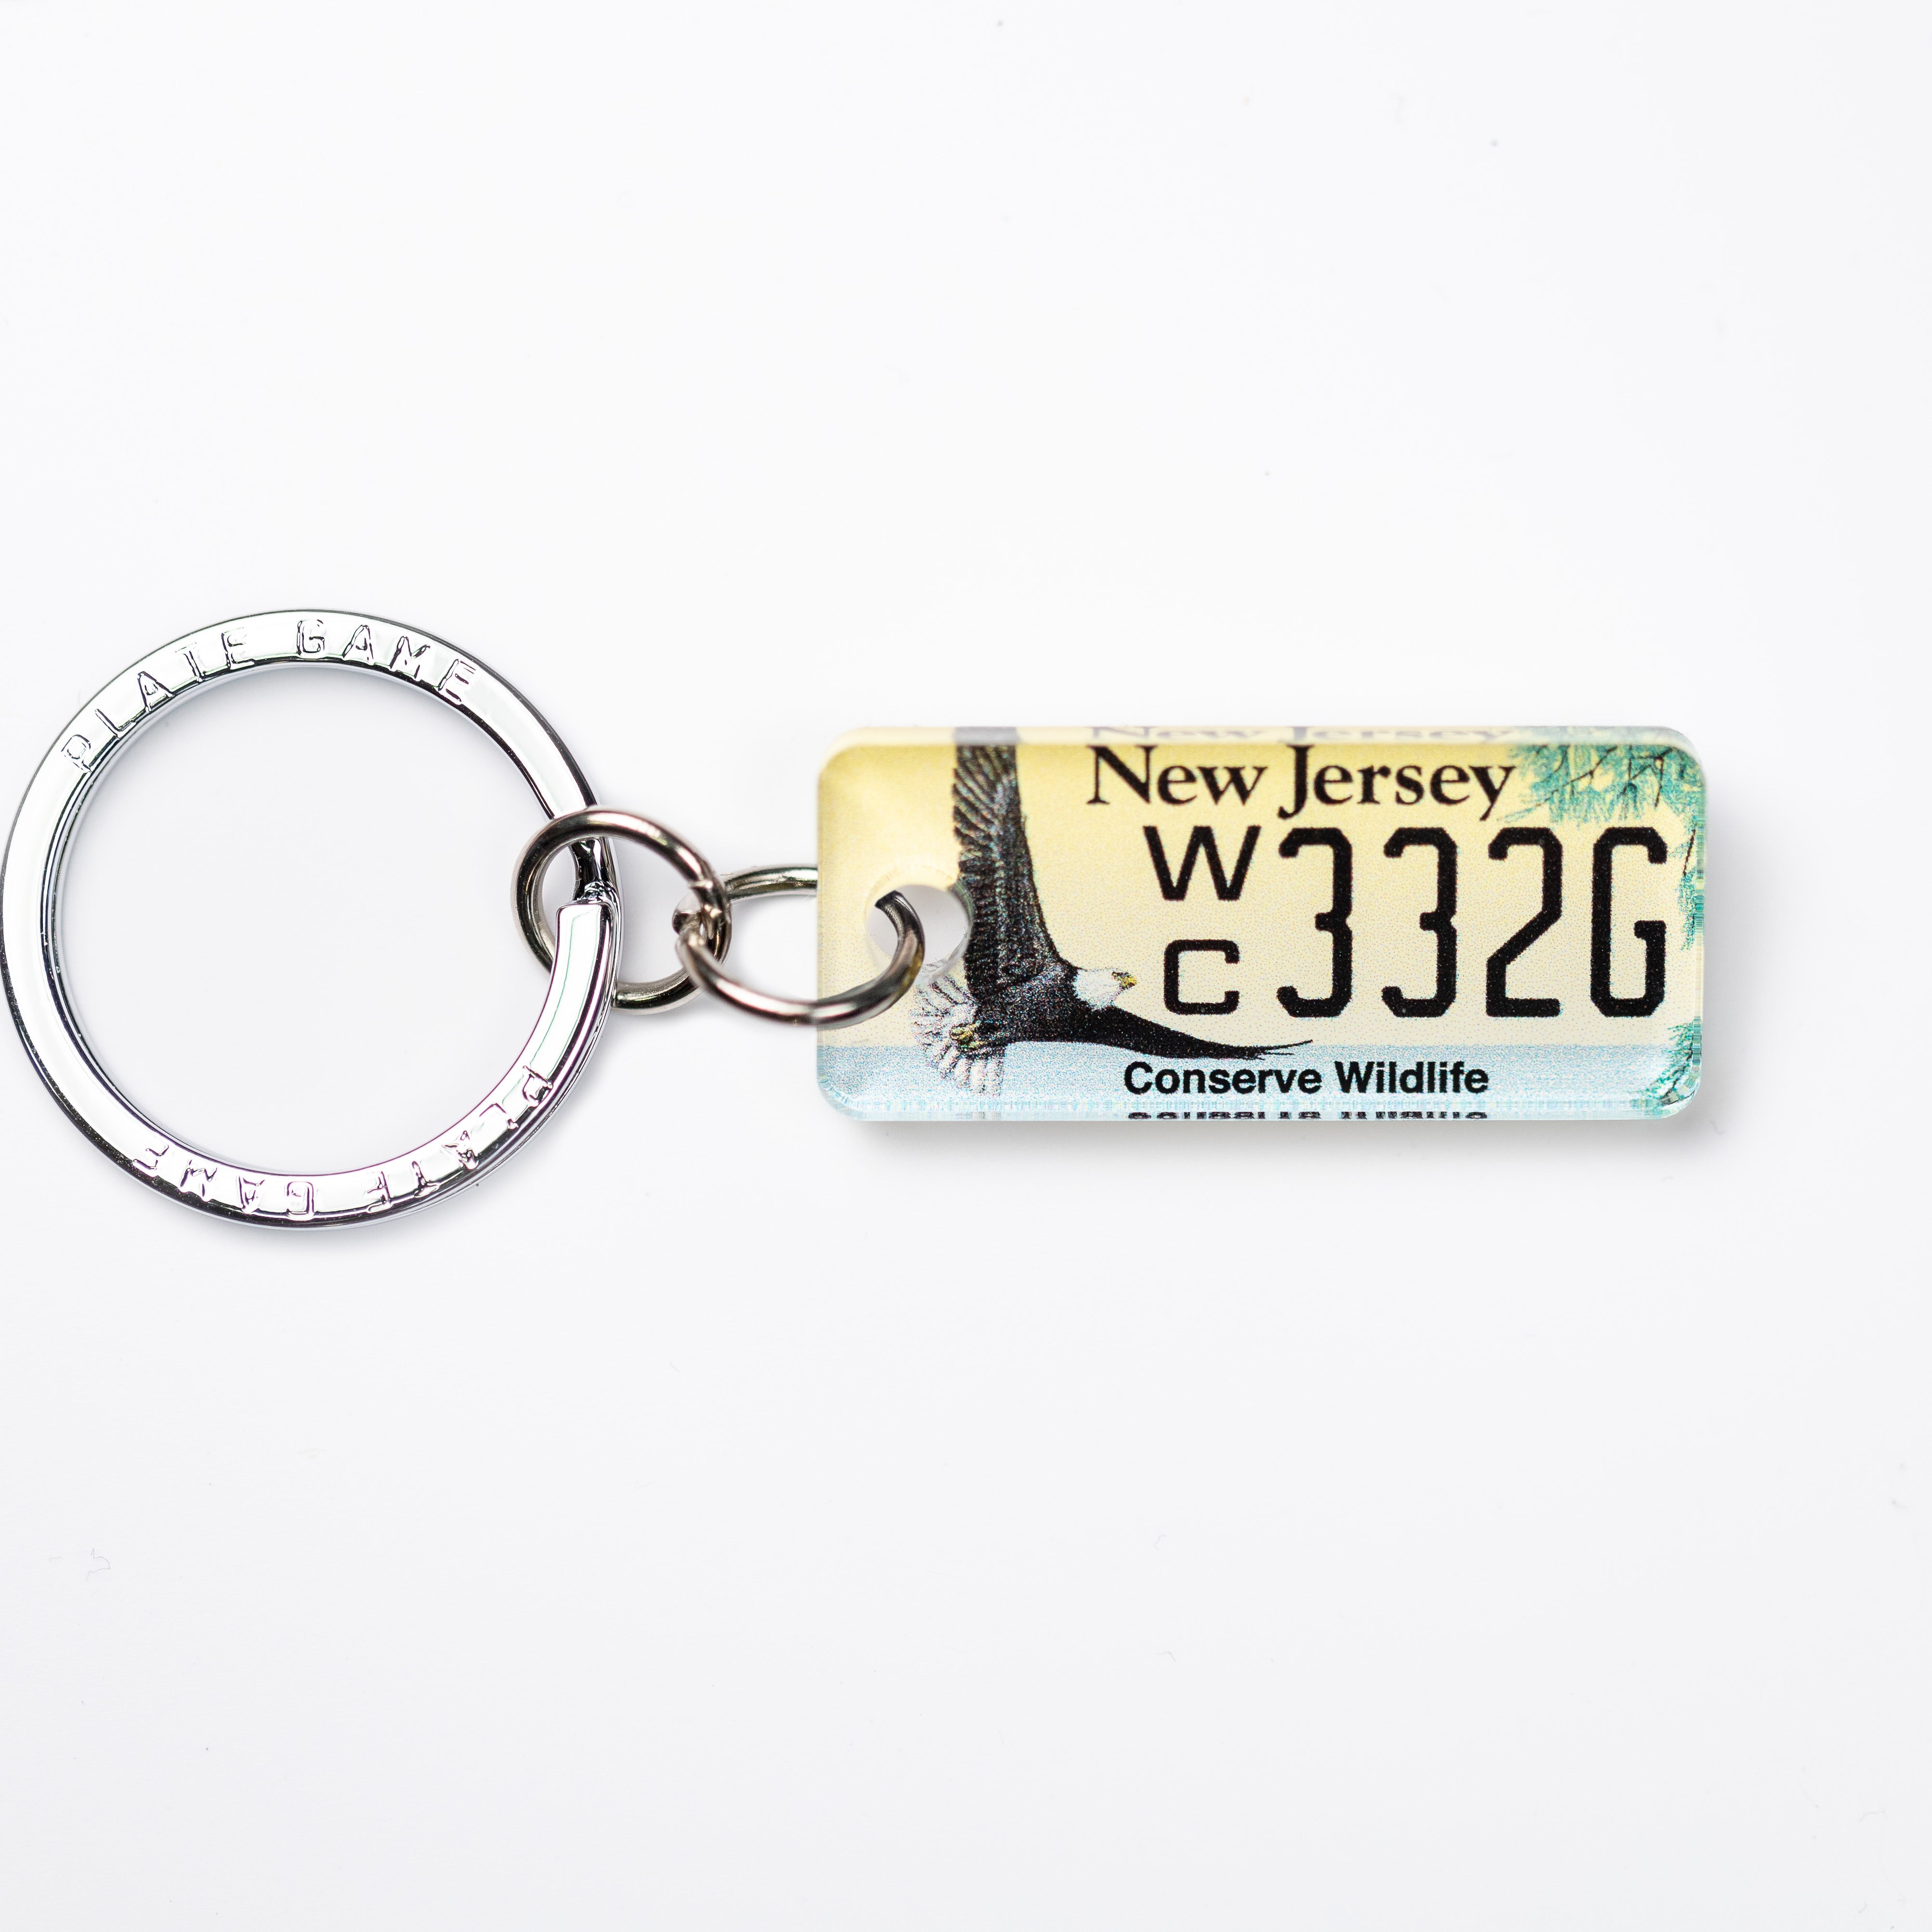 Keychains & Lanyards for sale in Kearny, New Jersey